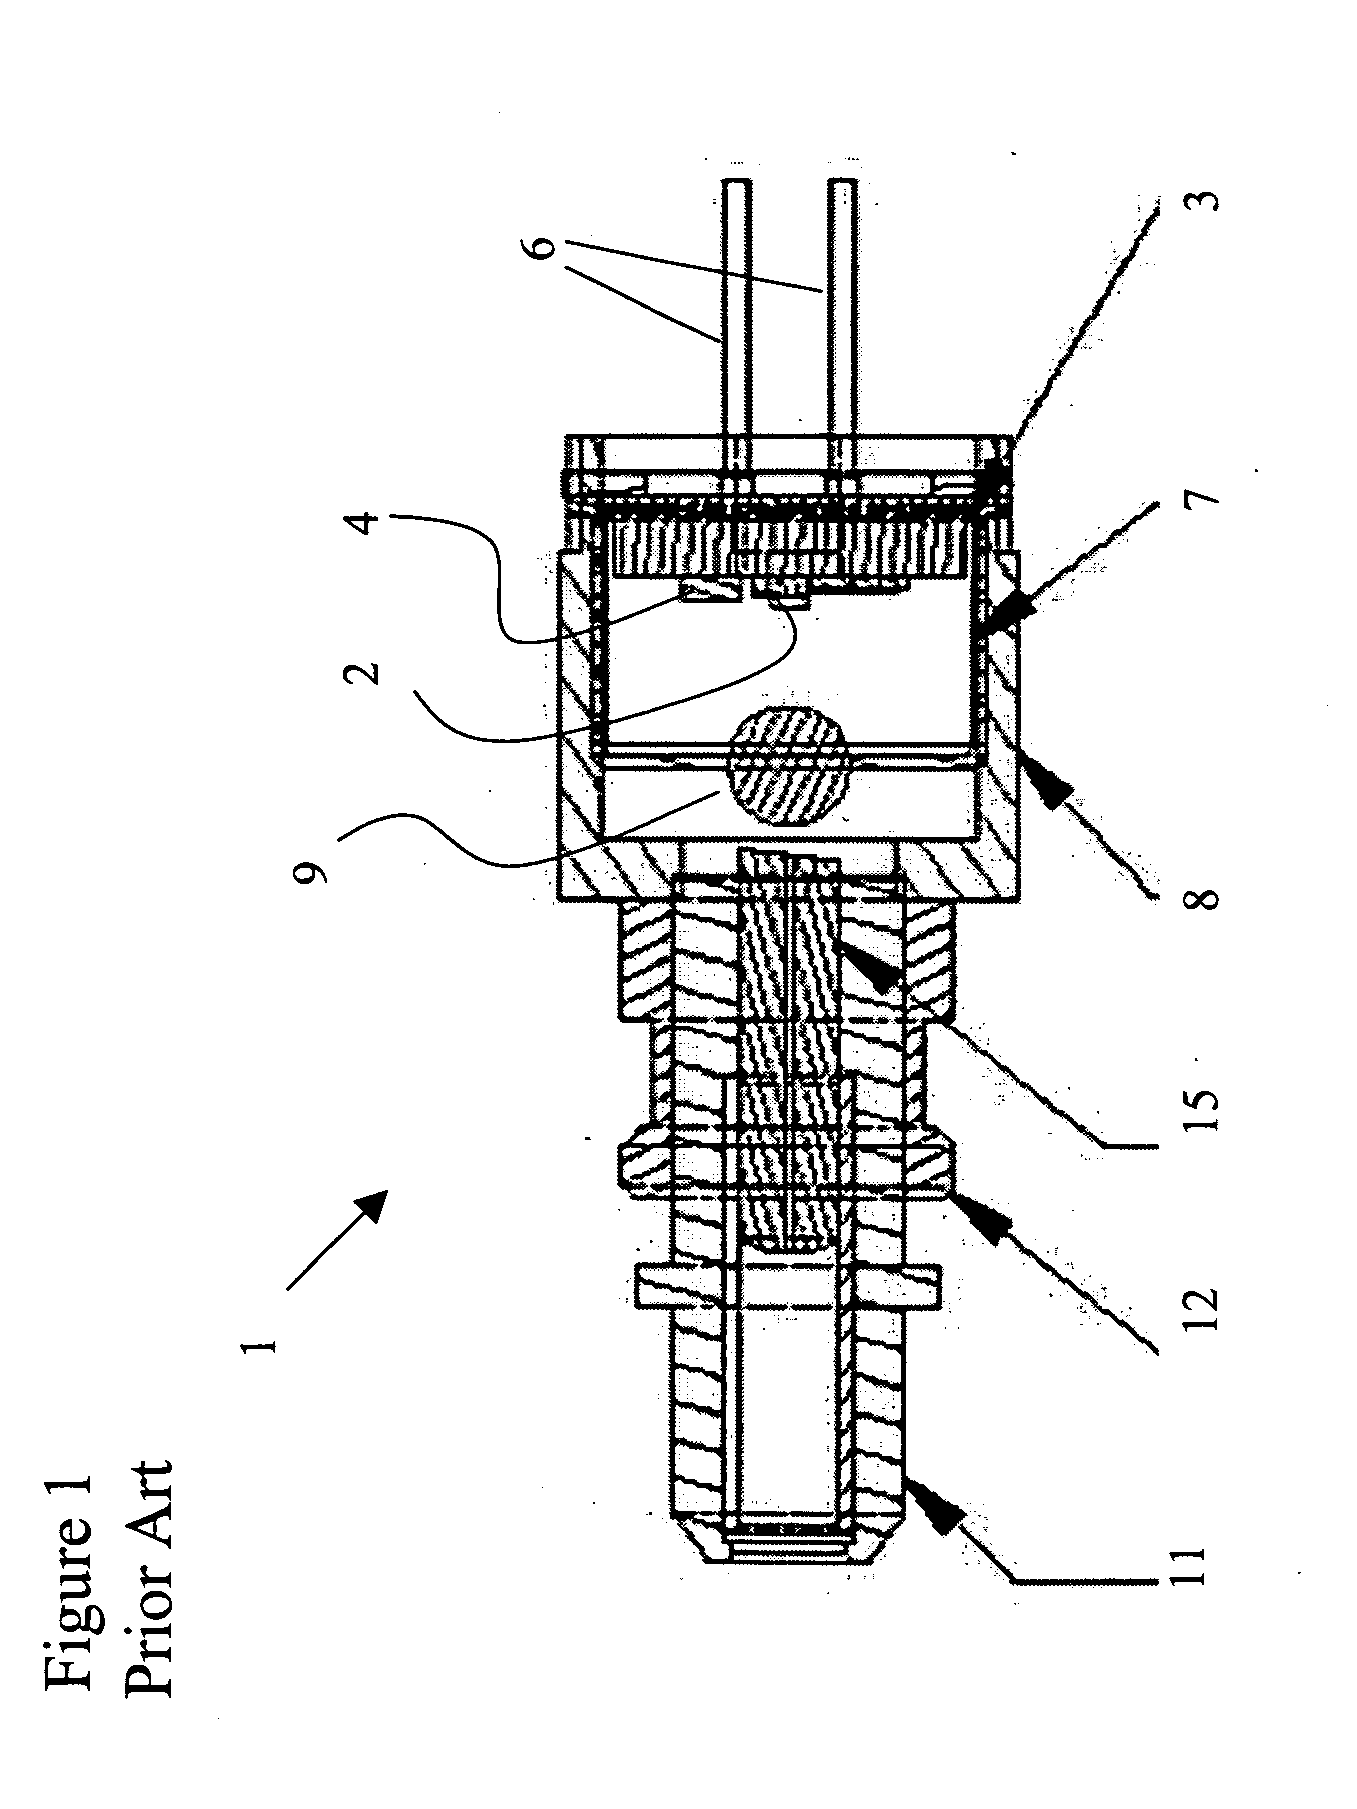 Receiver optical sub-assembly with reduced back reflection